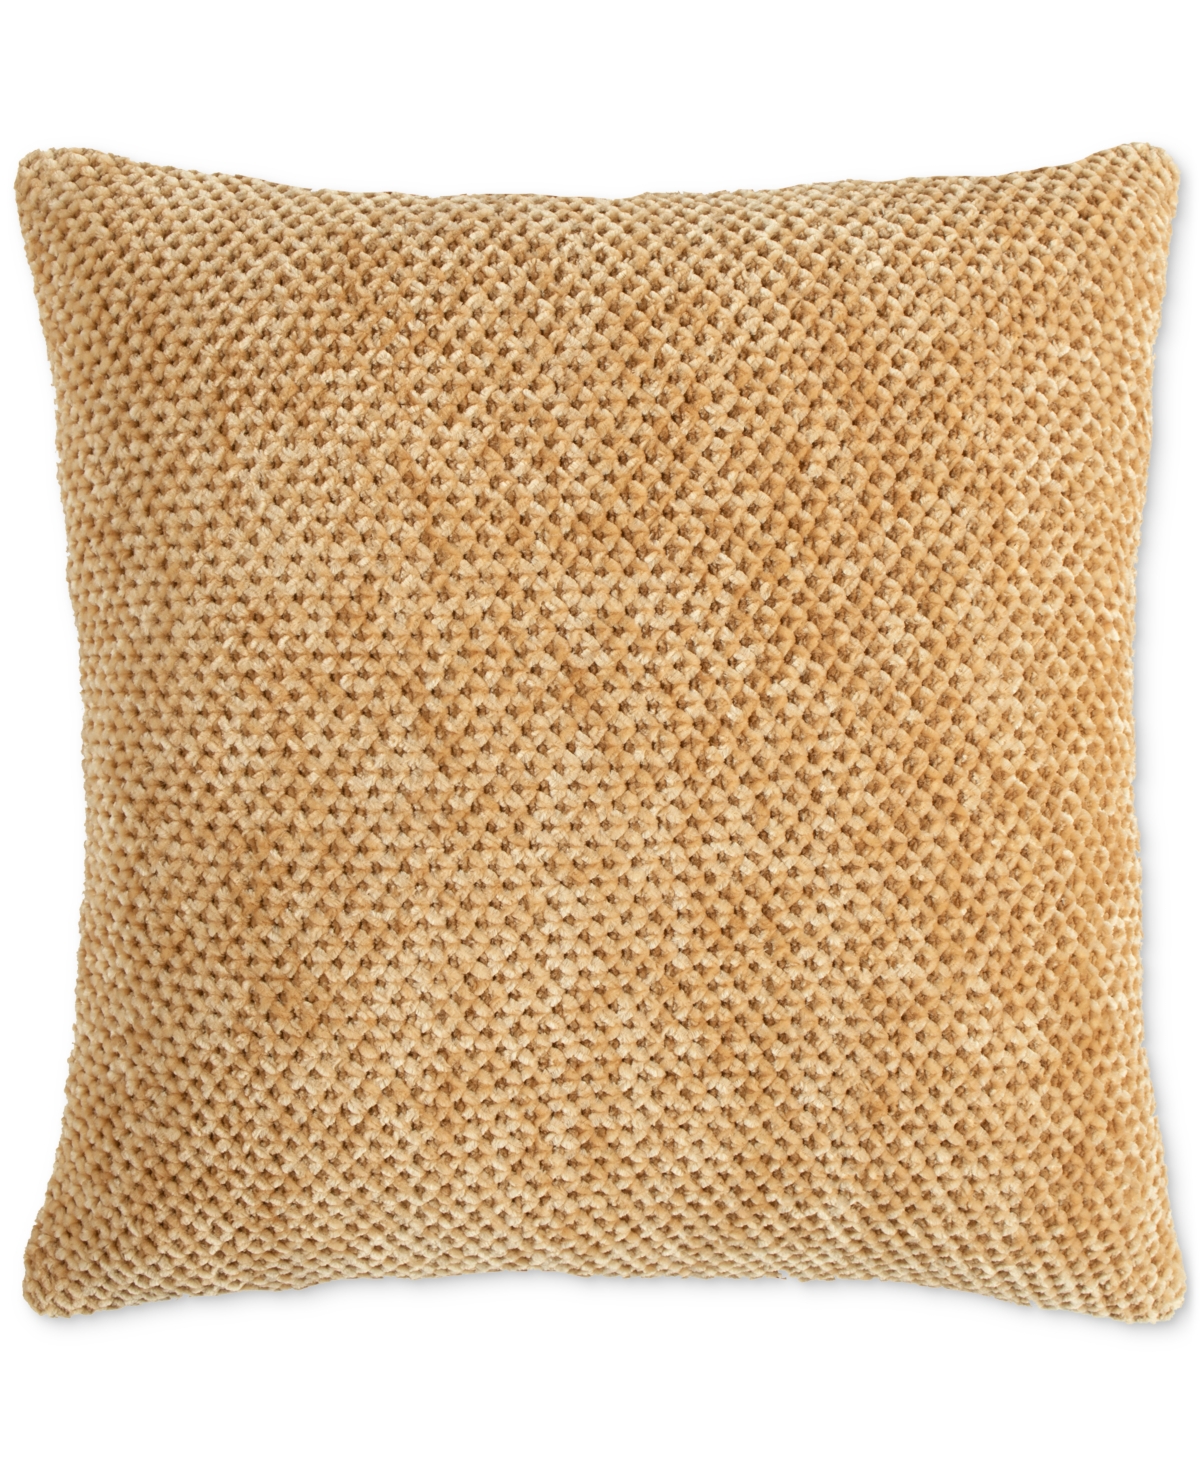 Lush Decor Braided Decorative Pillow, 18" X 18" In Iced Coffee